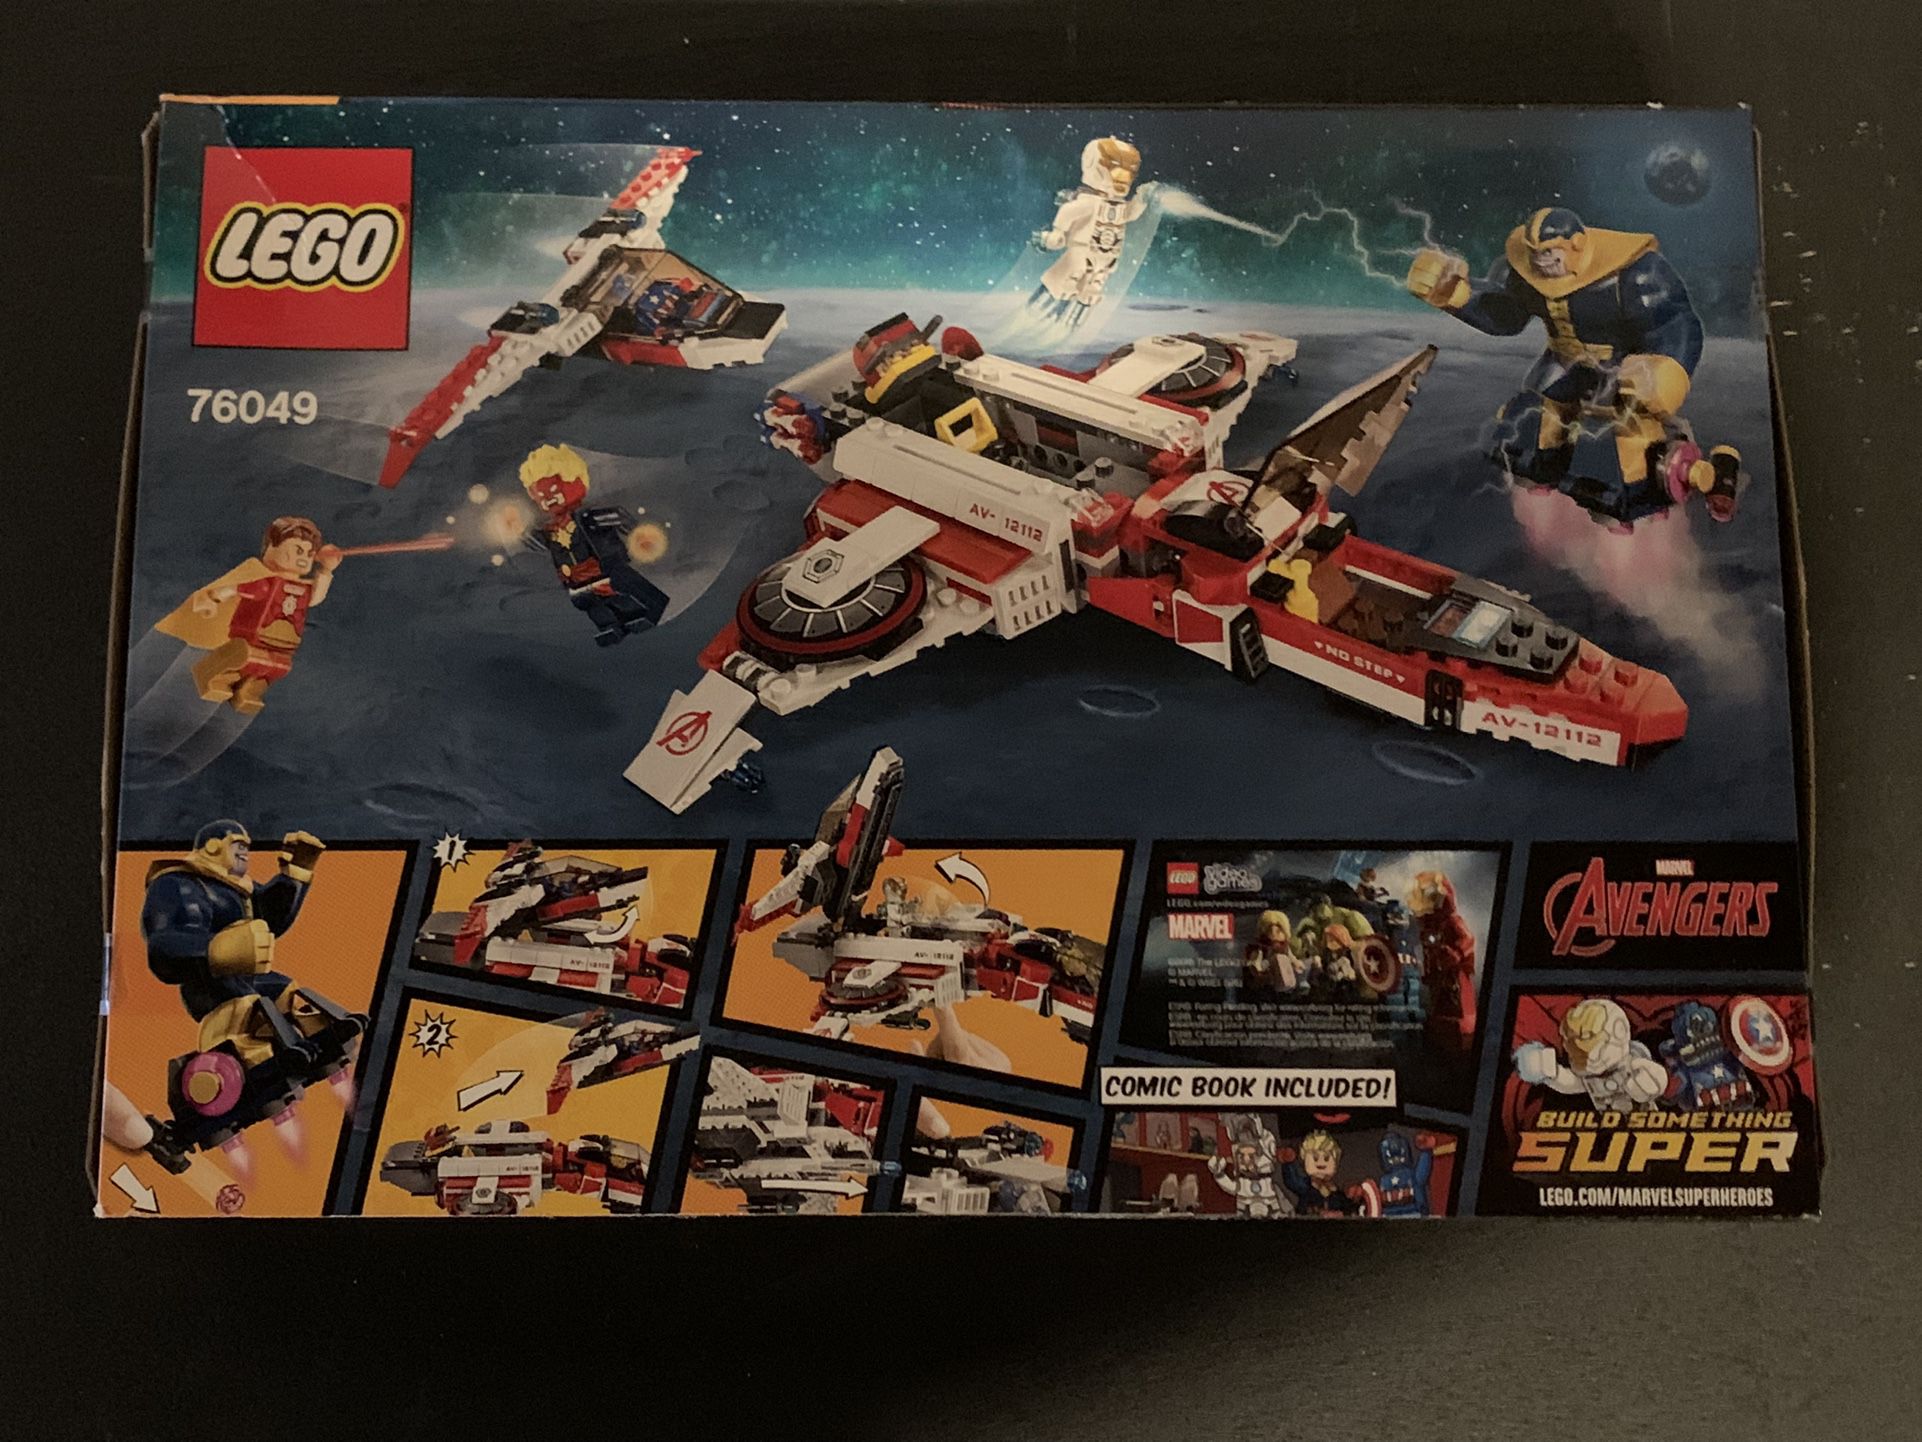 Lego Super Hero's Avenjet Space Mission #76049 Sale in Hillsborough Township, - OfferUp